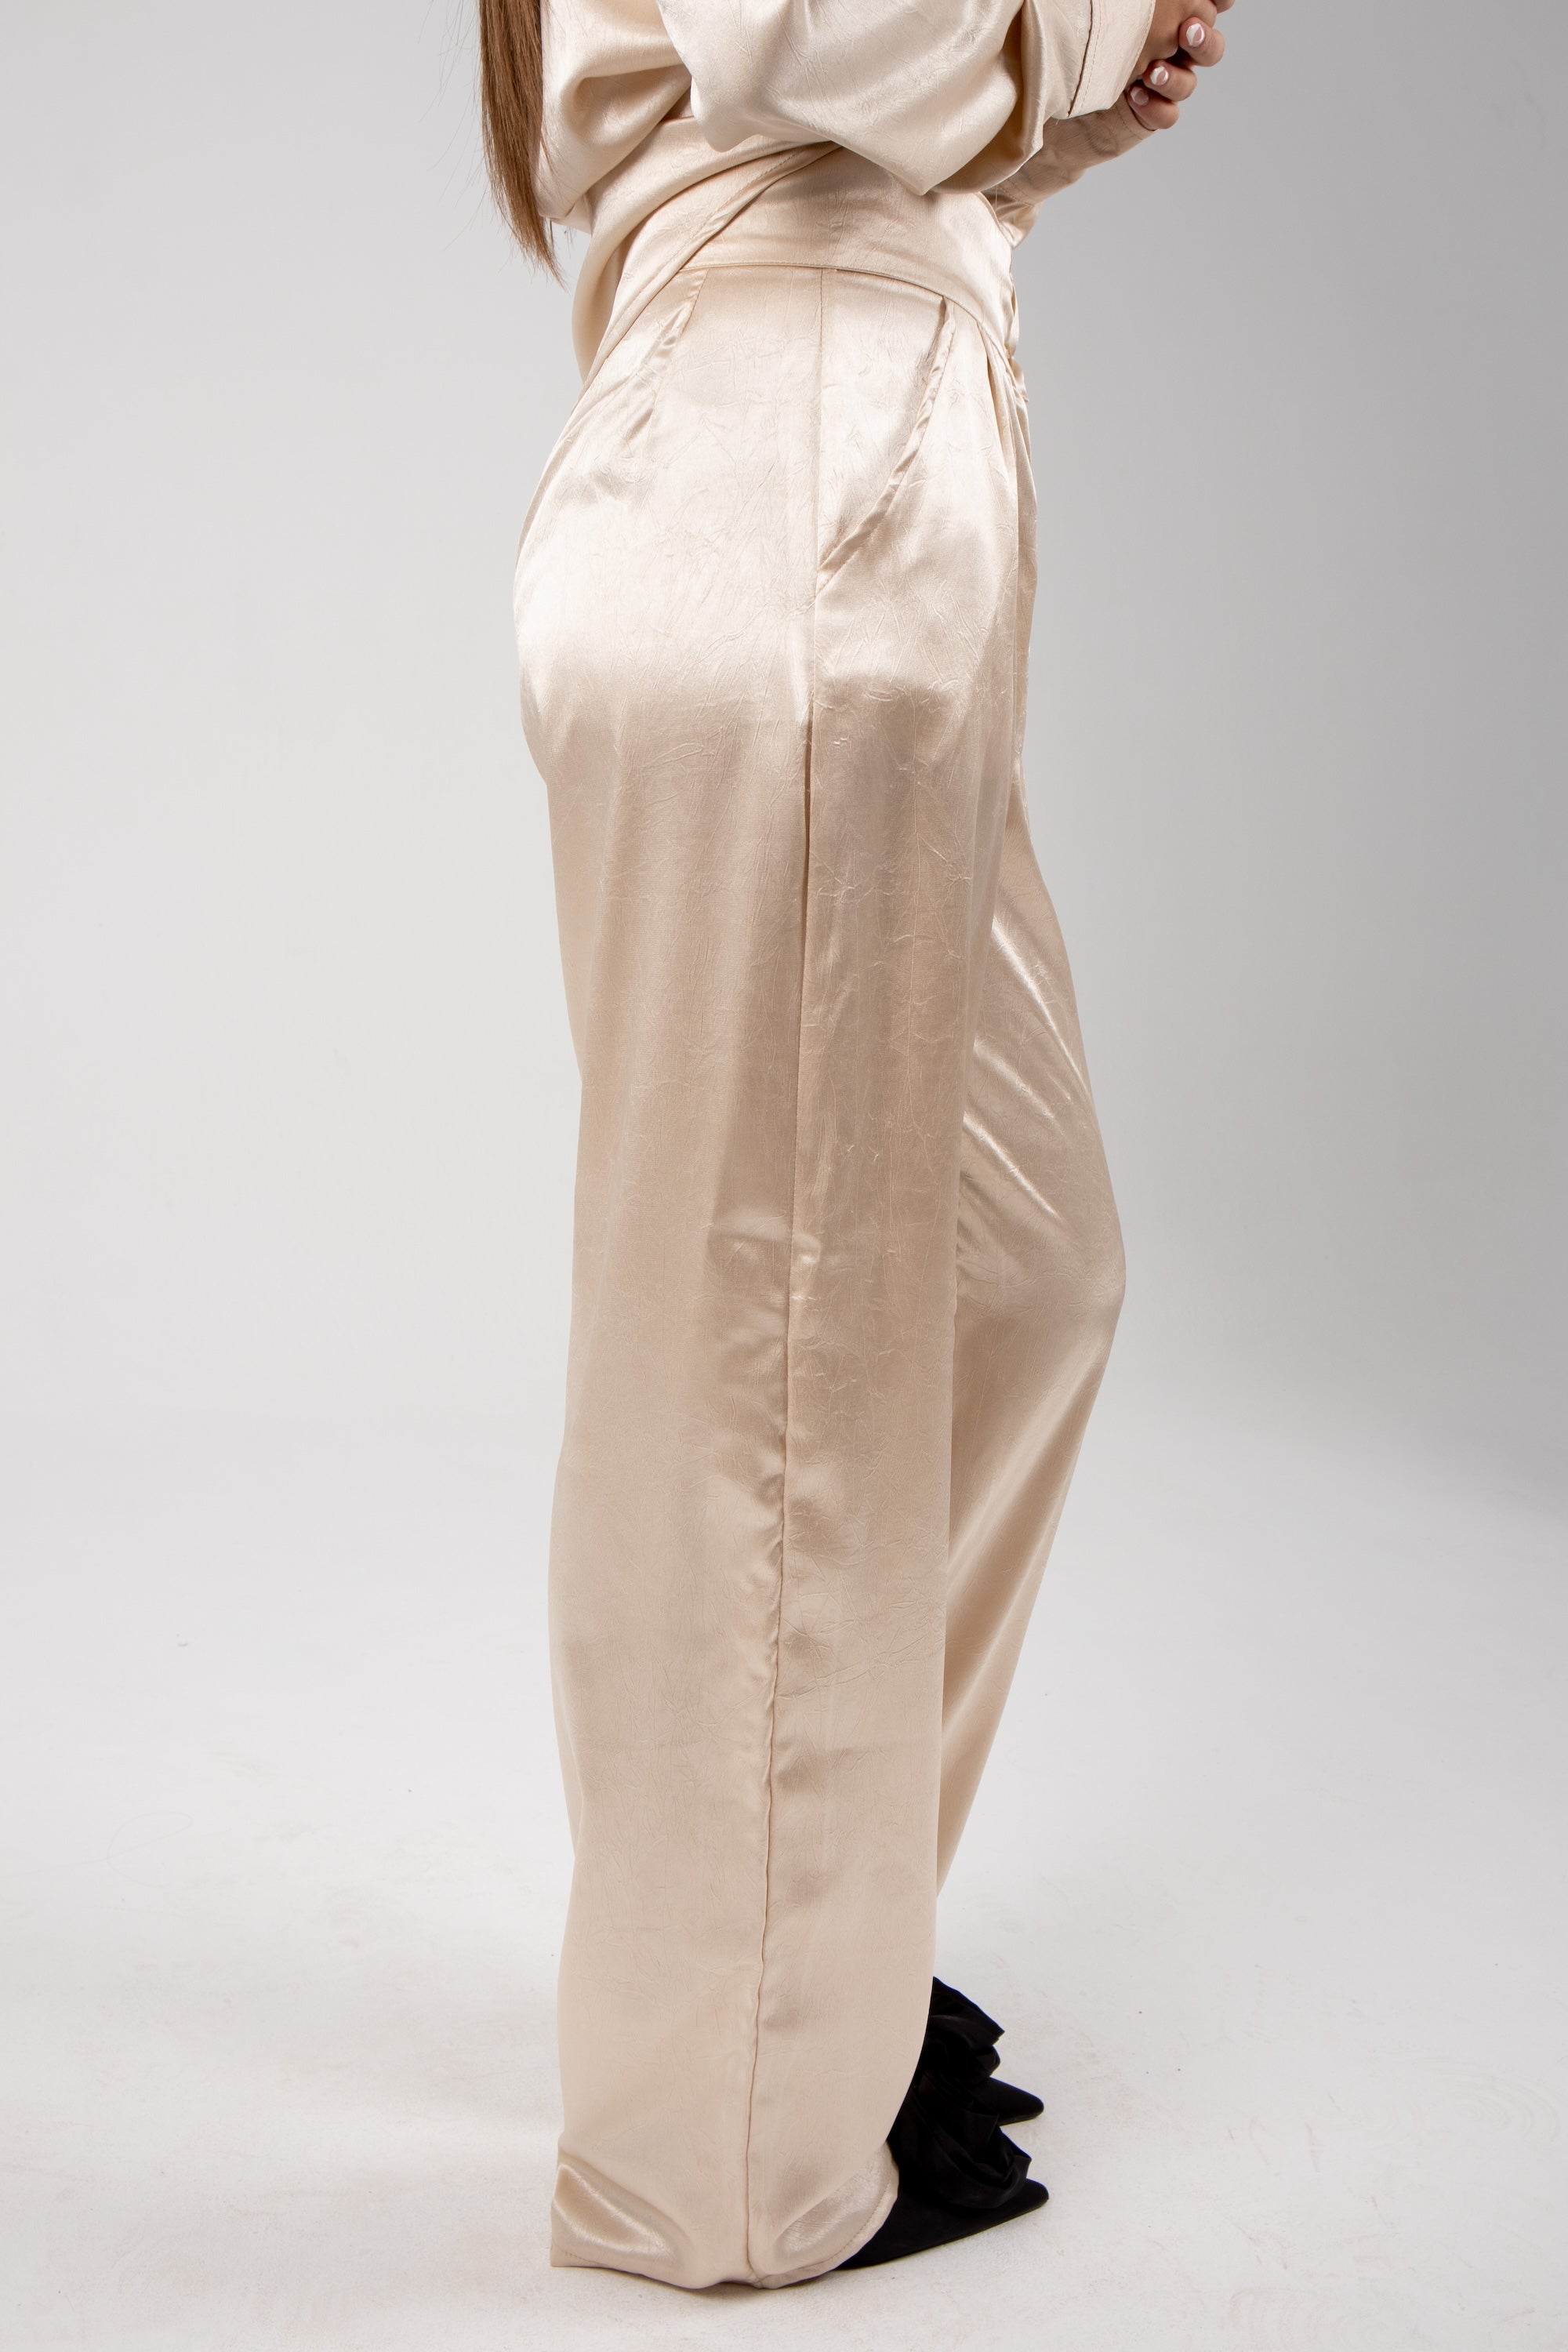 Crushed satin pants in beige